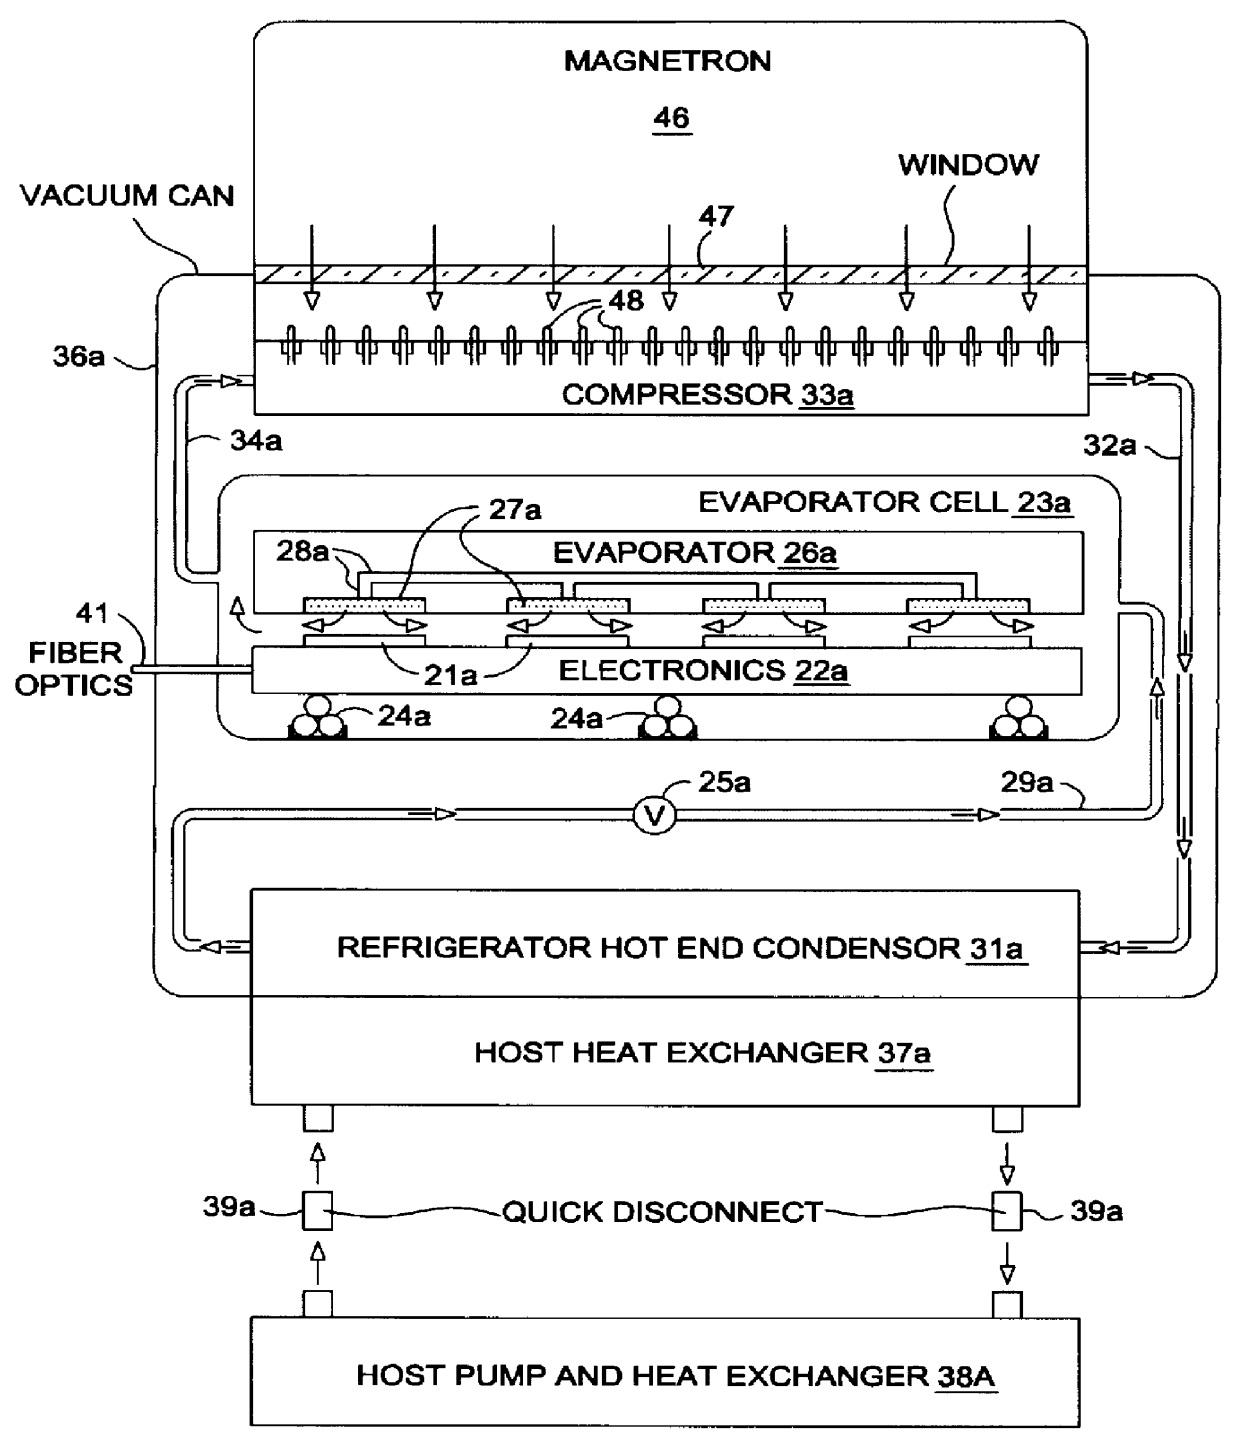 Refrigeration system for electronic components having environmental isolation